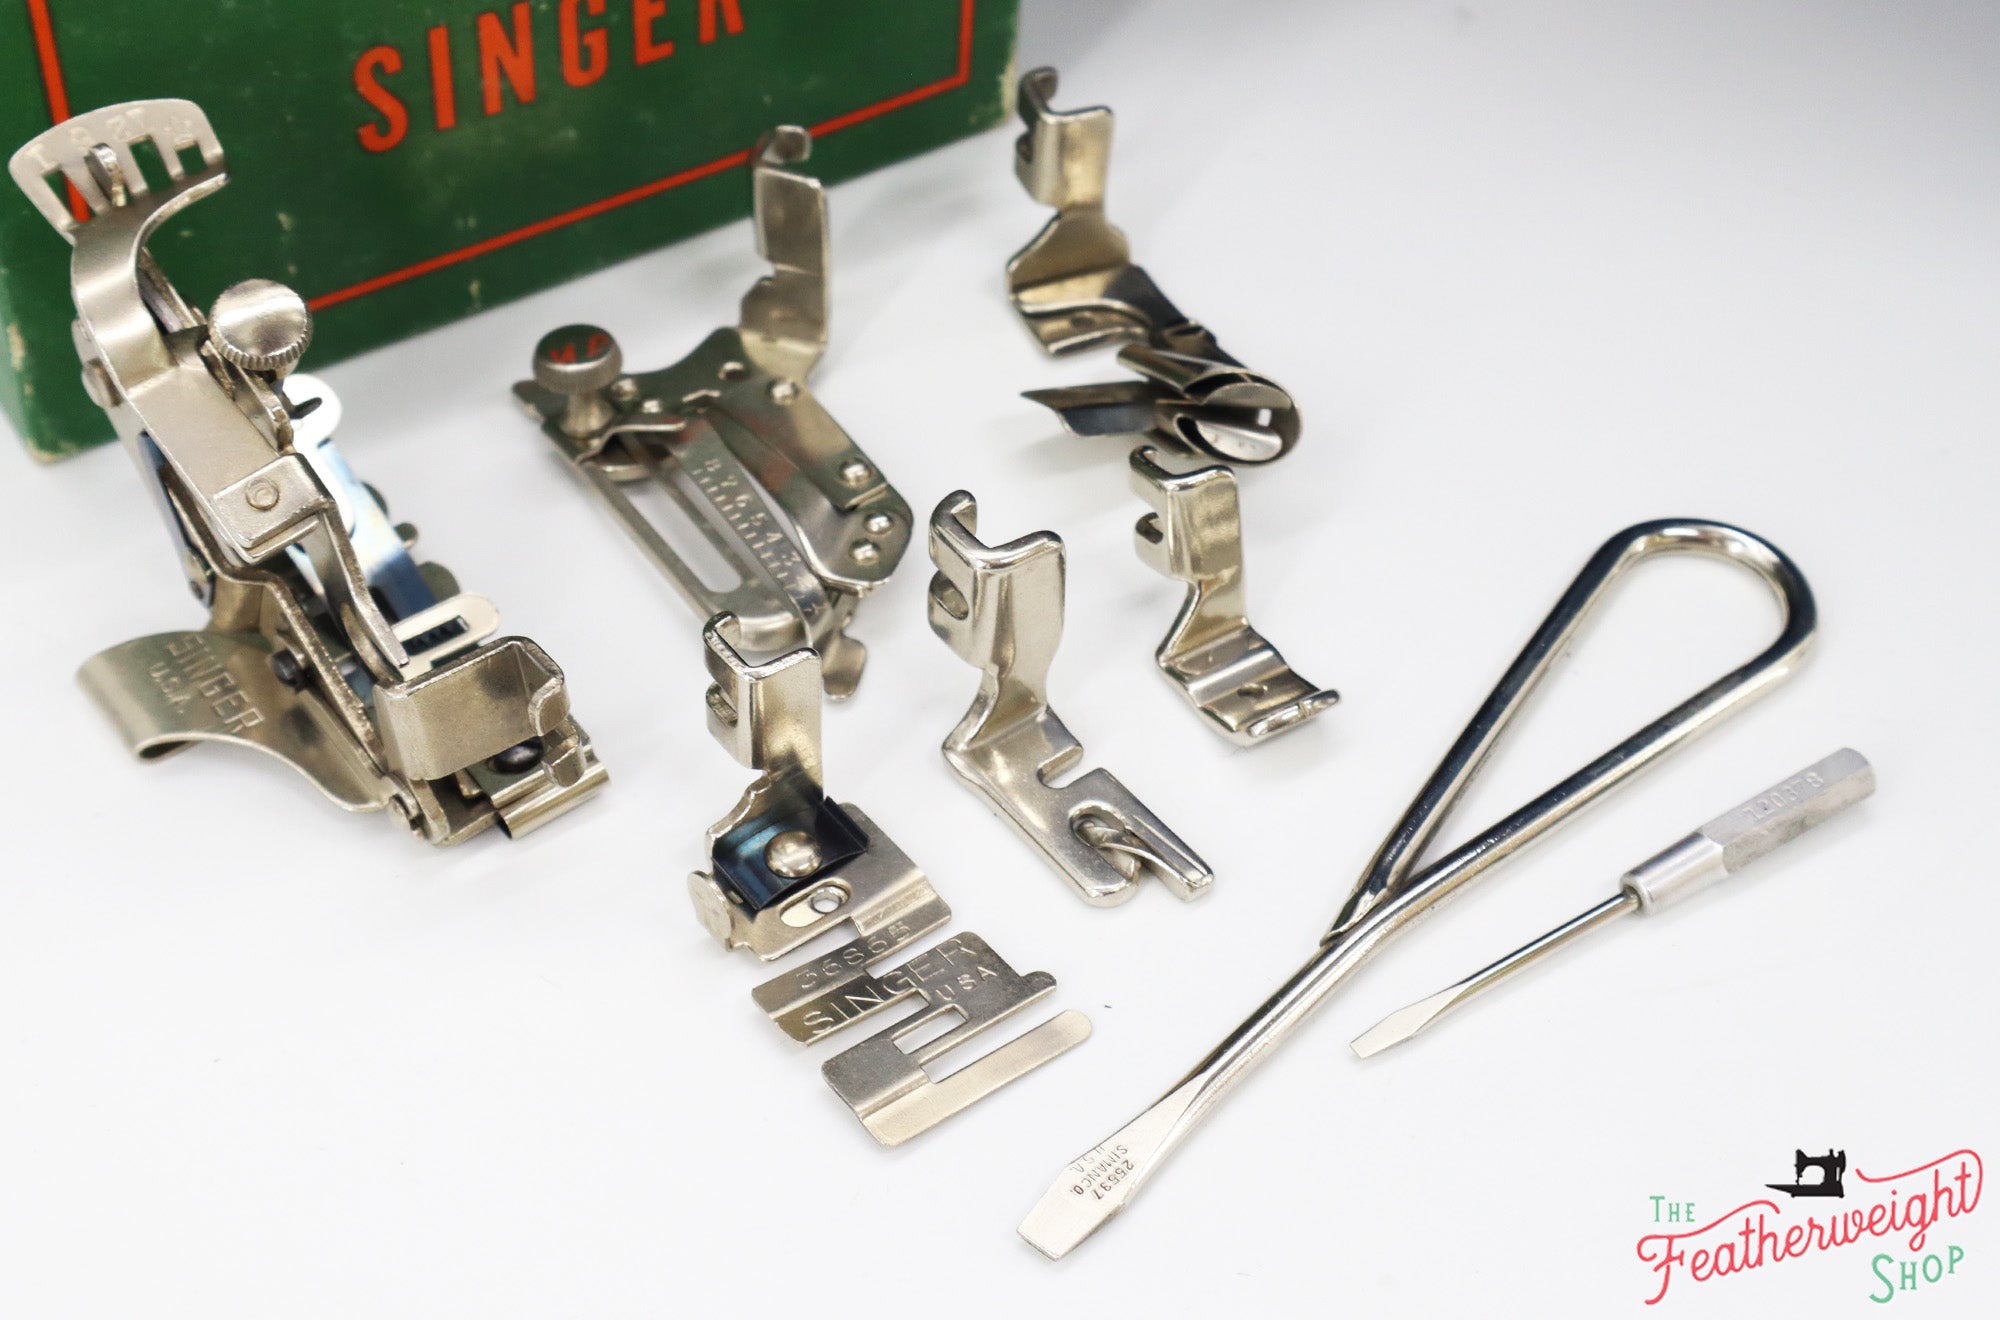 Singer Featherweight 221 Parts and Details – The Singer Featherweight Shop